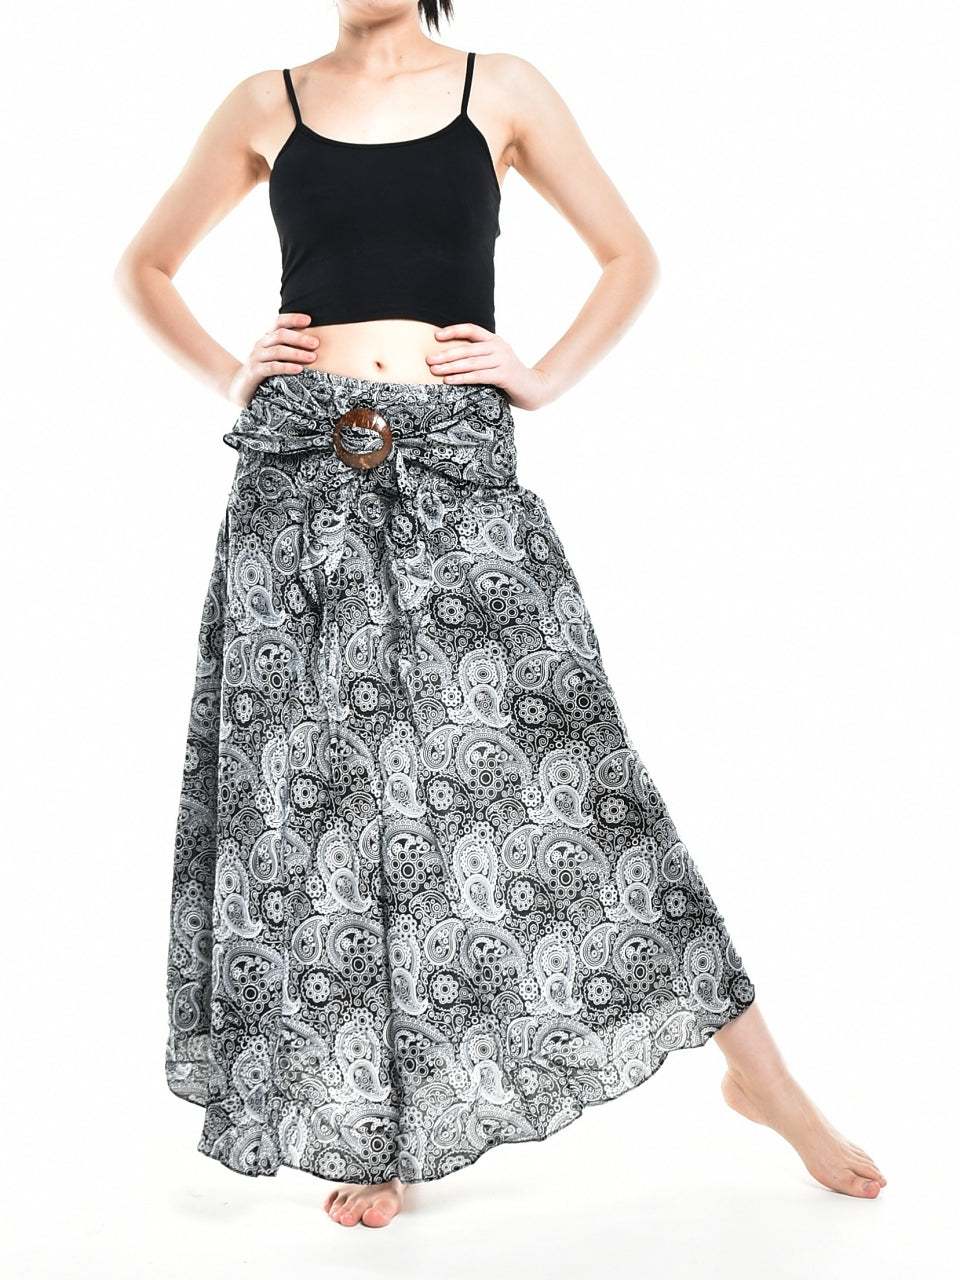 Bohotusk Black Orbit Long Skirt With Coconut Buckle (& Strapless Dress) S/M to L/XL